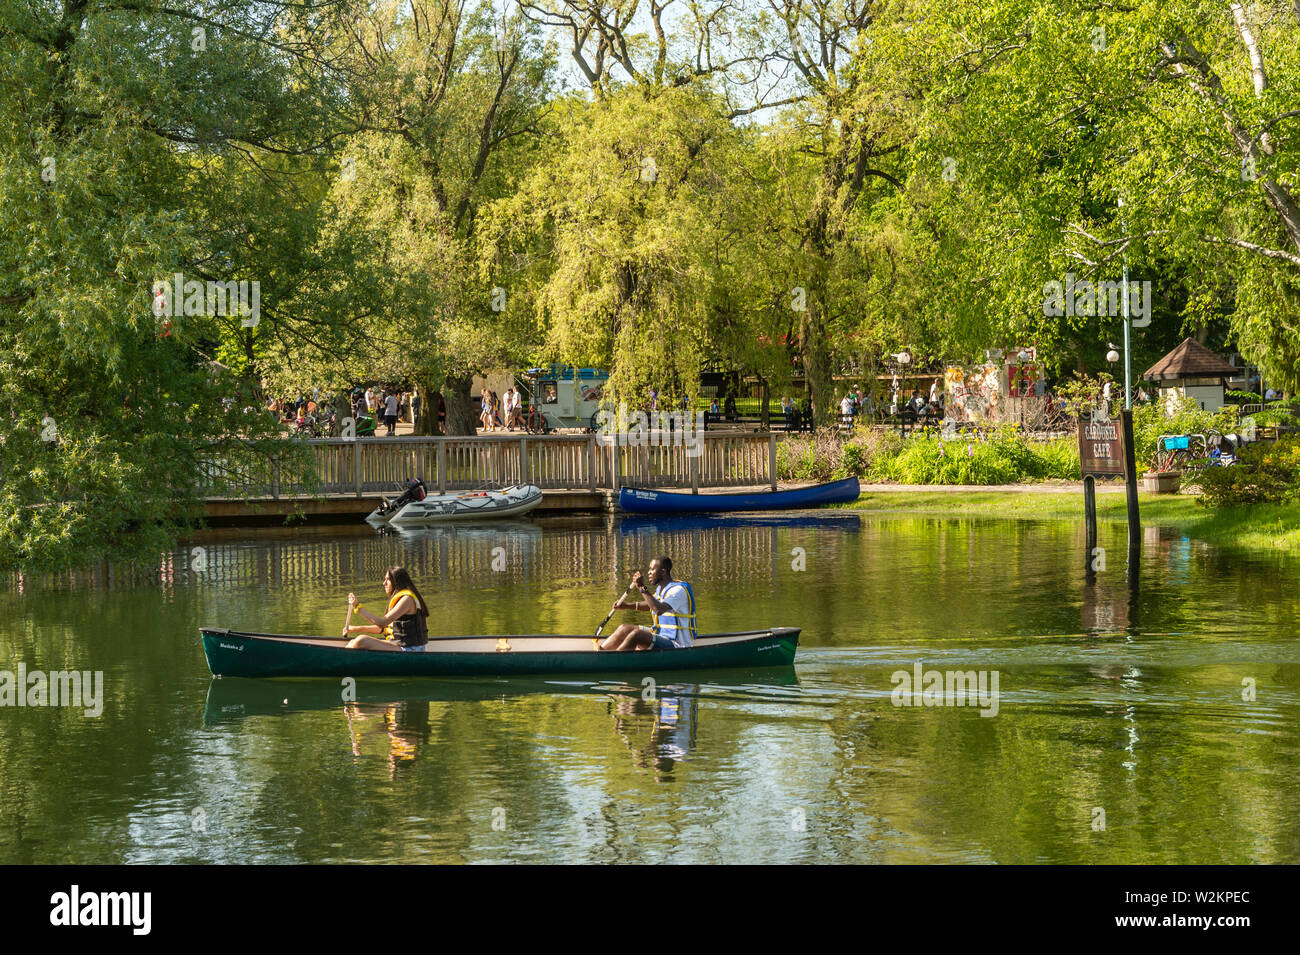 Toronto, CA - 22 June 2019: Two people rowing in a canoe on Lake Ontario at Toronto Centre Island. Stock Photo